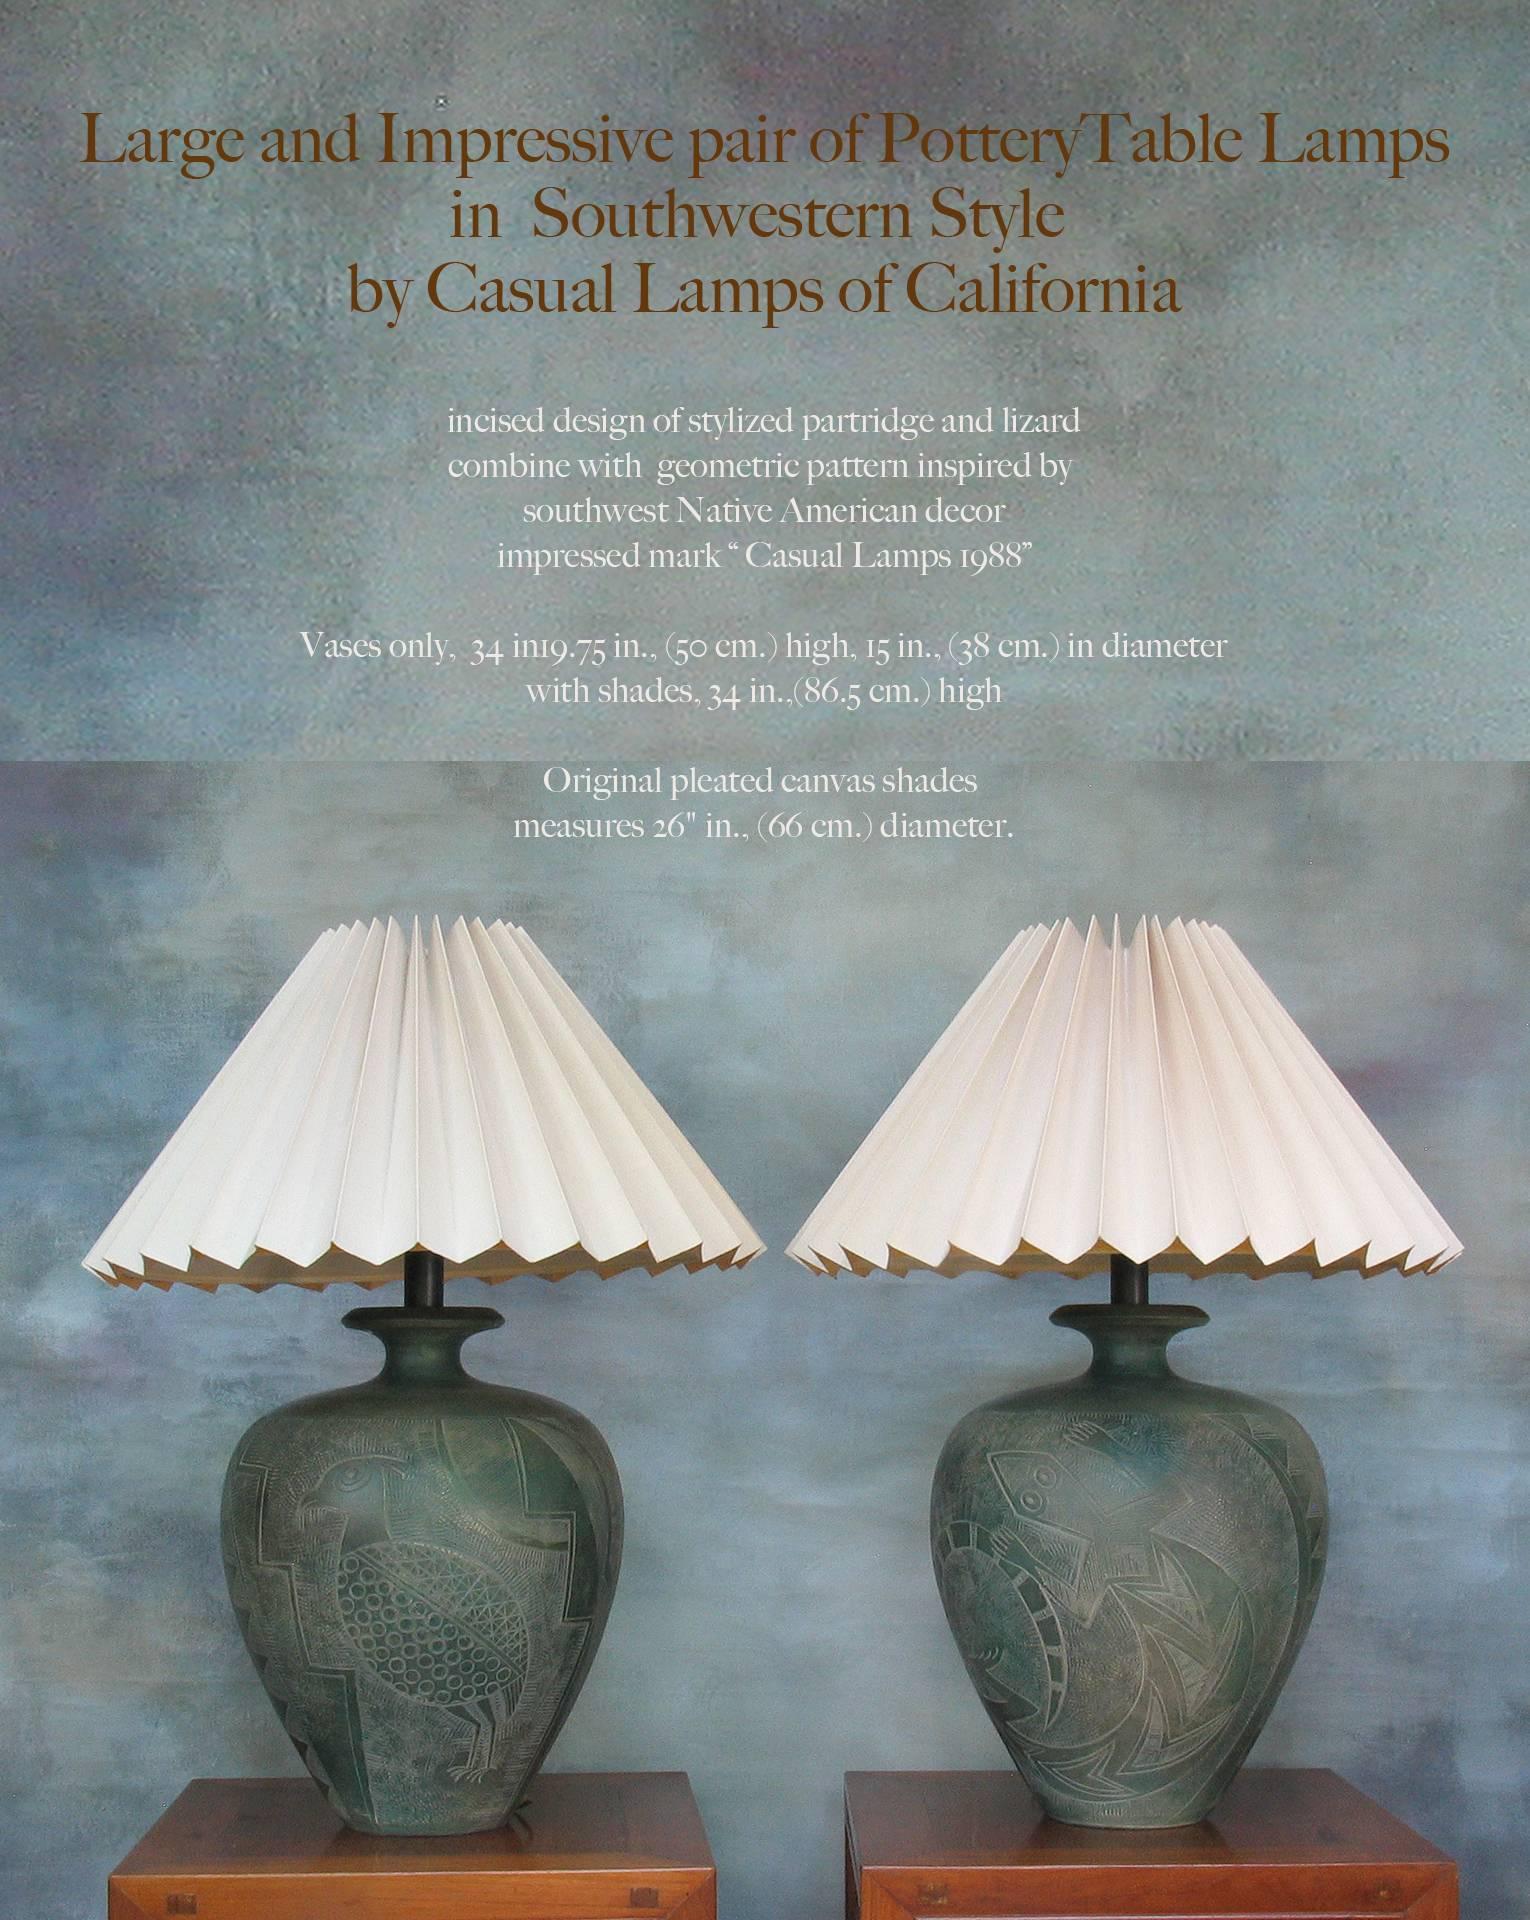 Large and Impressive Pair of Southwestern Table Lamps by Casual Lamps of California, Incised design of stylized partridge and lizard combined with geometric pattern inspired by Southwest Native American decor, impressed mark "Casual Lamps